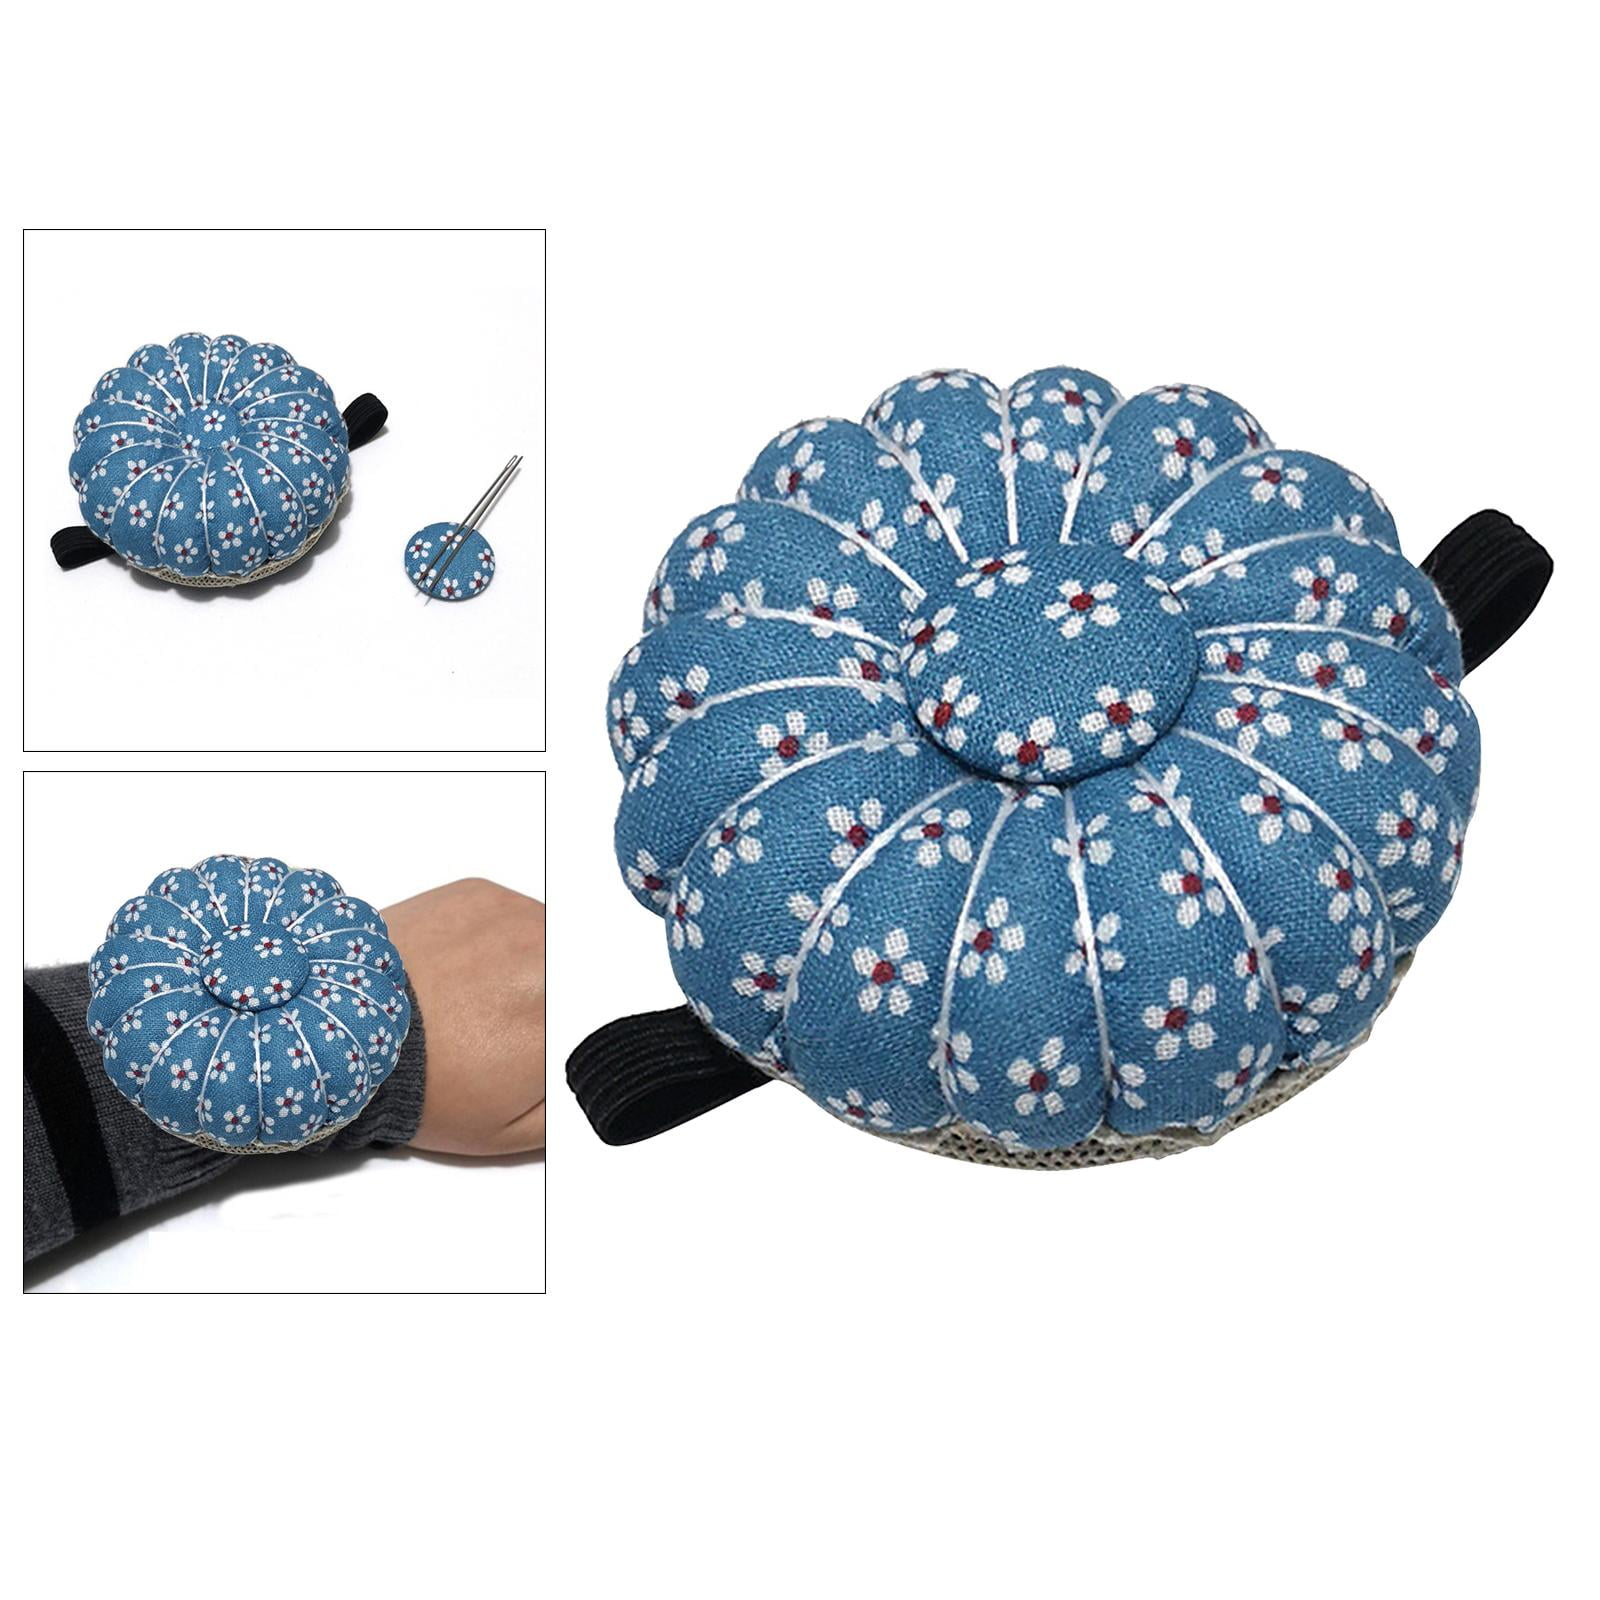 Pin Cushions - Wrist Pin Cushion for Sewing Pincushion with Soft Fabric, Pin Patchwork Holder Crafts & Sewing Blue, Size: 6.5 cm